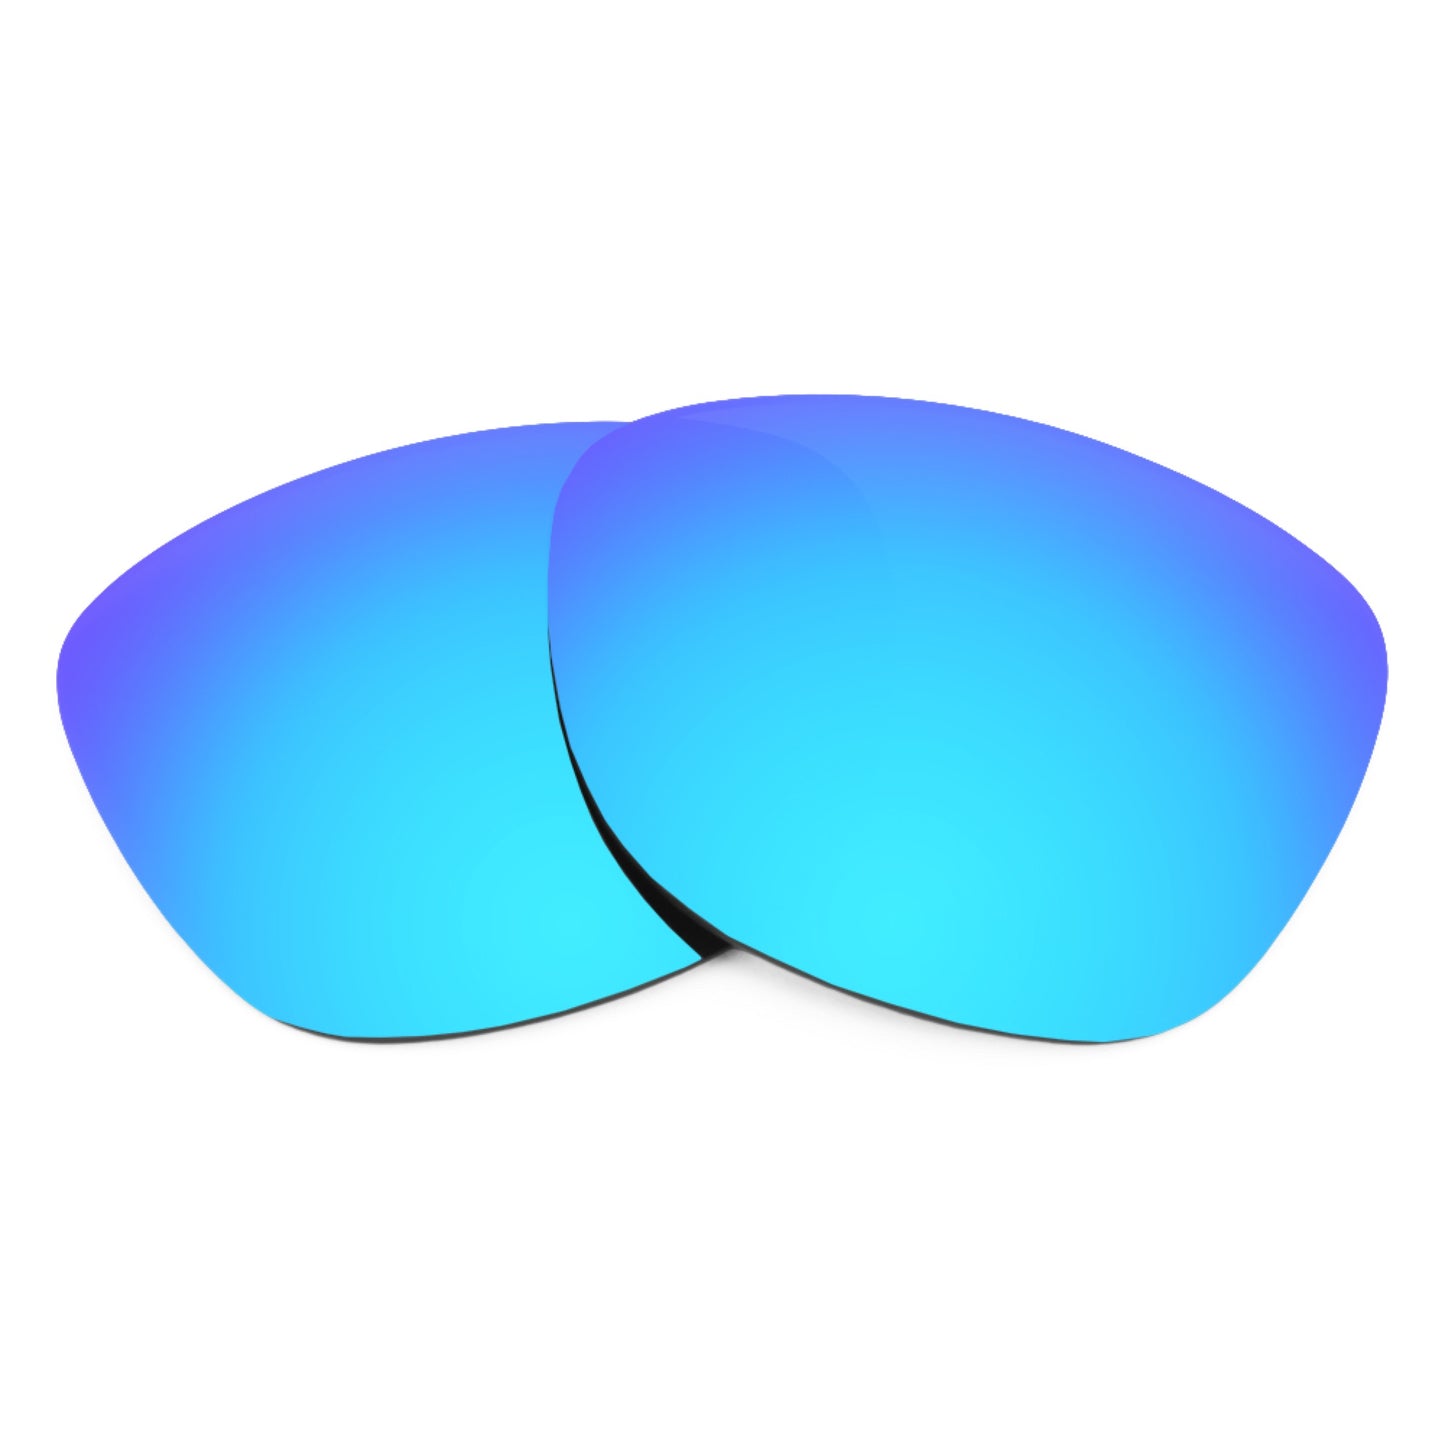 Revant replacement lenses for Ray-Ban Justin RB4165 51mm Non-Polarized Ice Blue